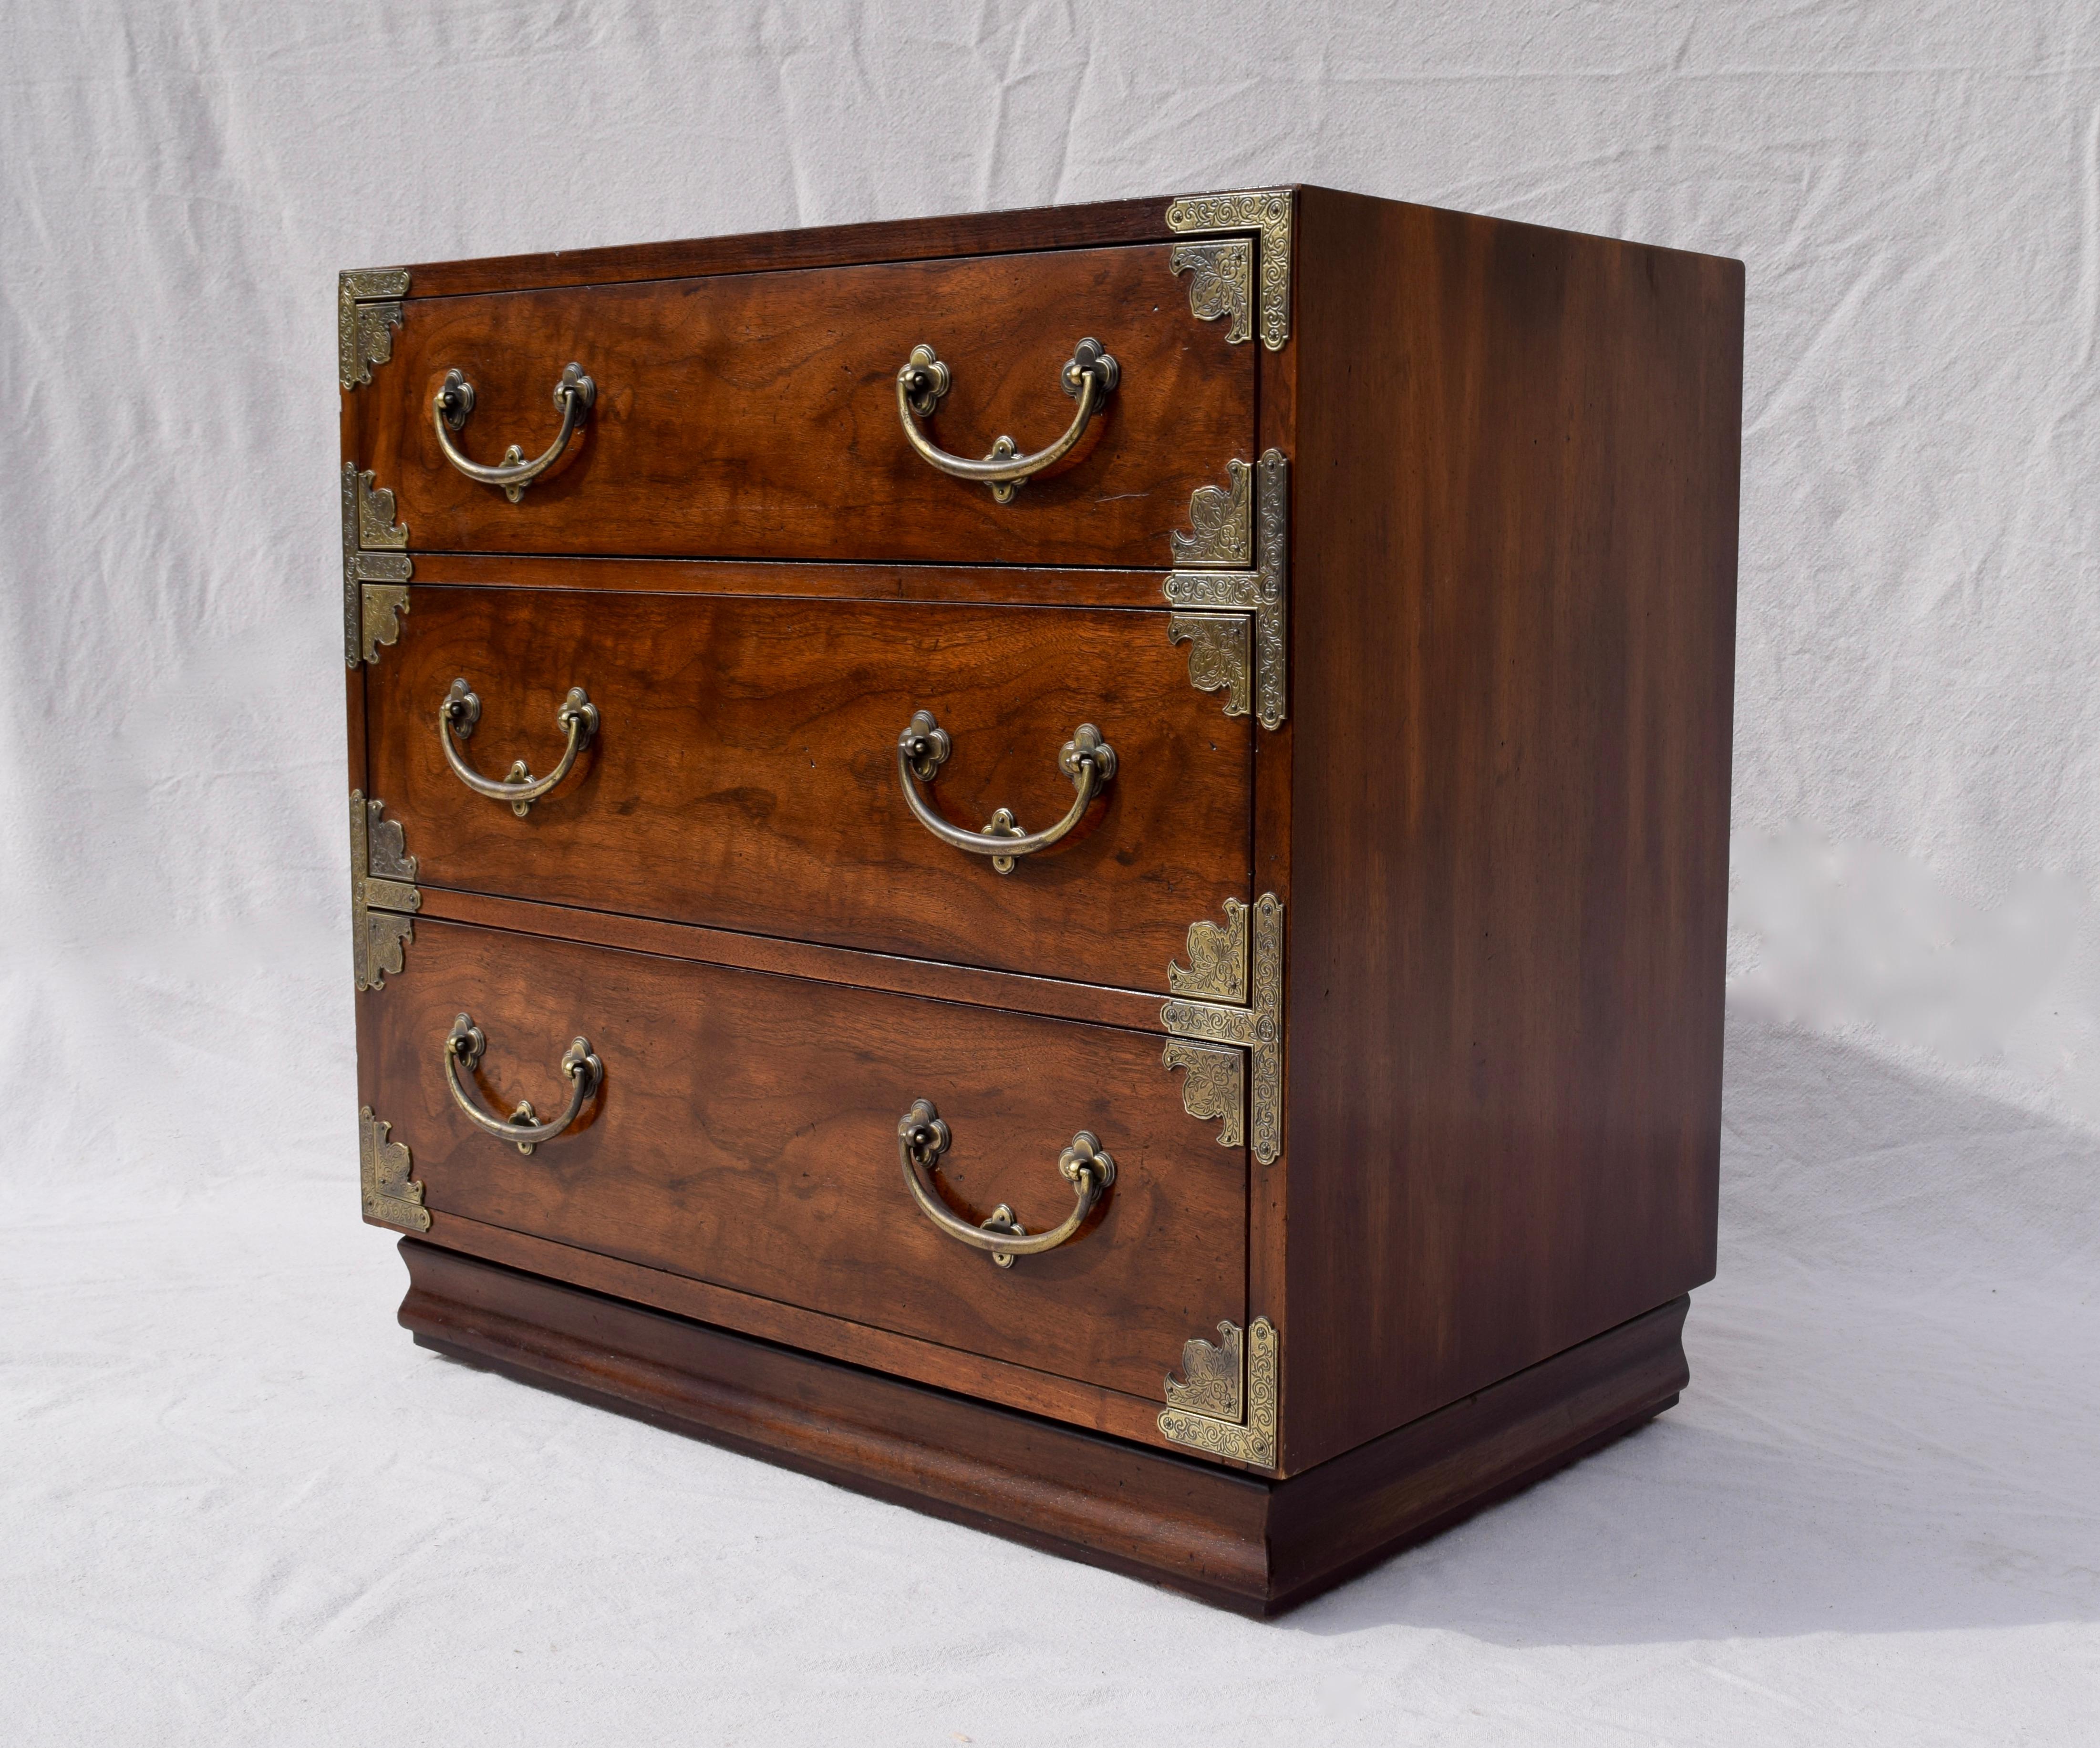 A bachelor chest in the Japanese Tansu style by Henredon of Morganton, North Carolina, USA. Made circa 1980. Mahogany with a rich brown finish. Brass hardware. Three dovetail drawers. Can be used as a bachelor chest or an oversized nightstand.